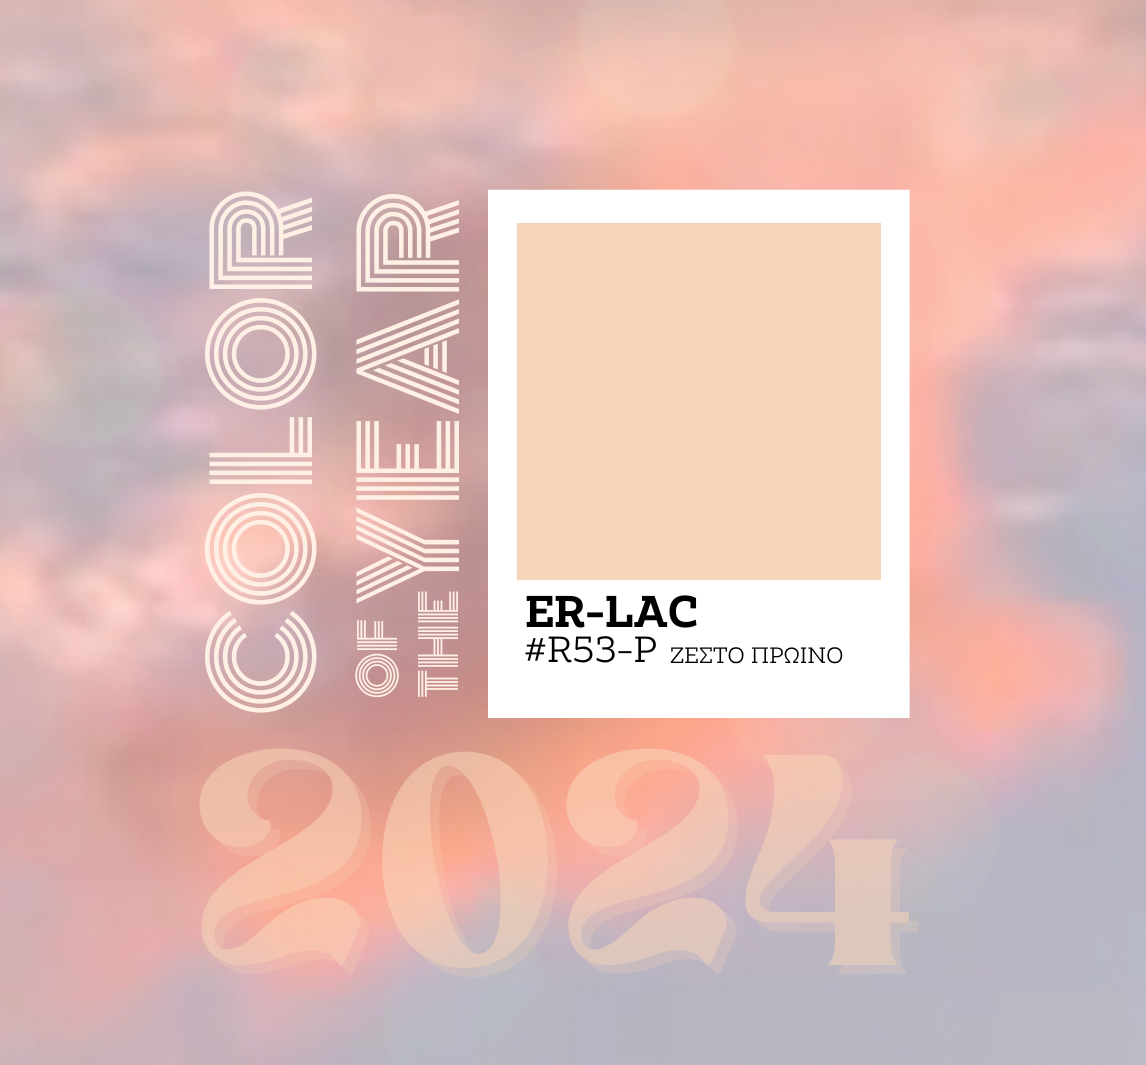 Color of the Year 2024